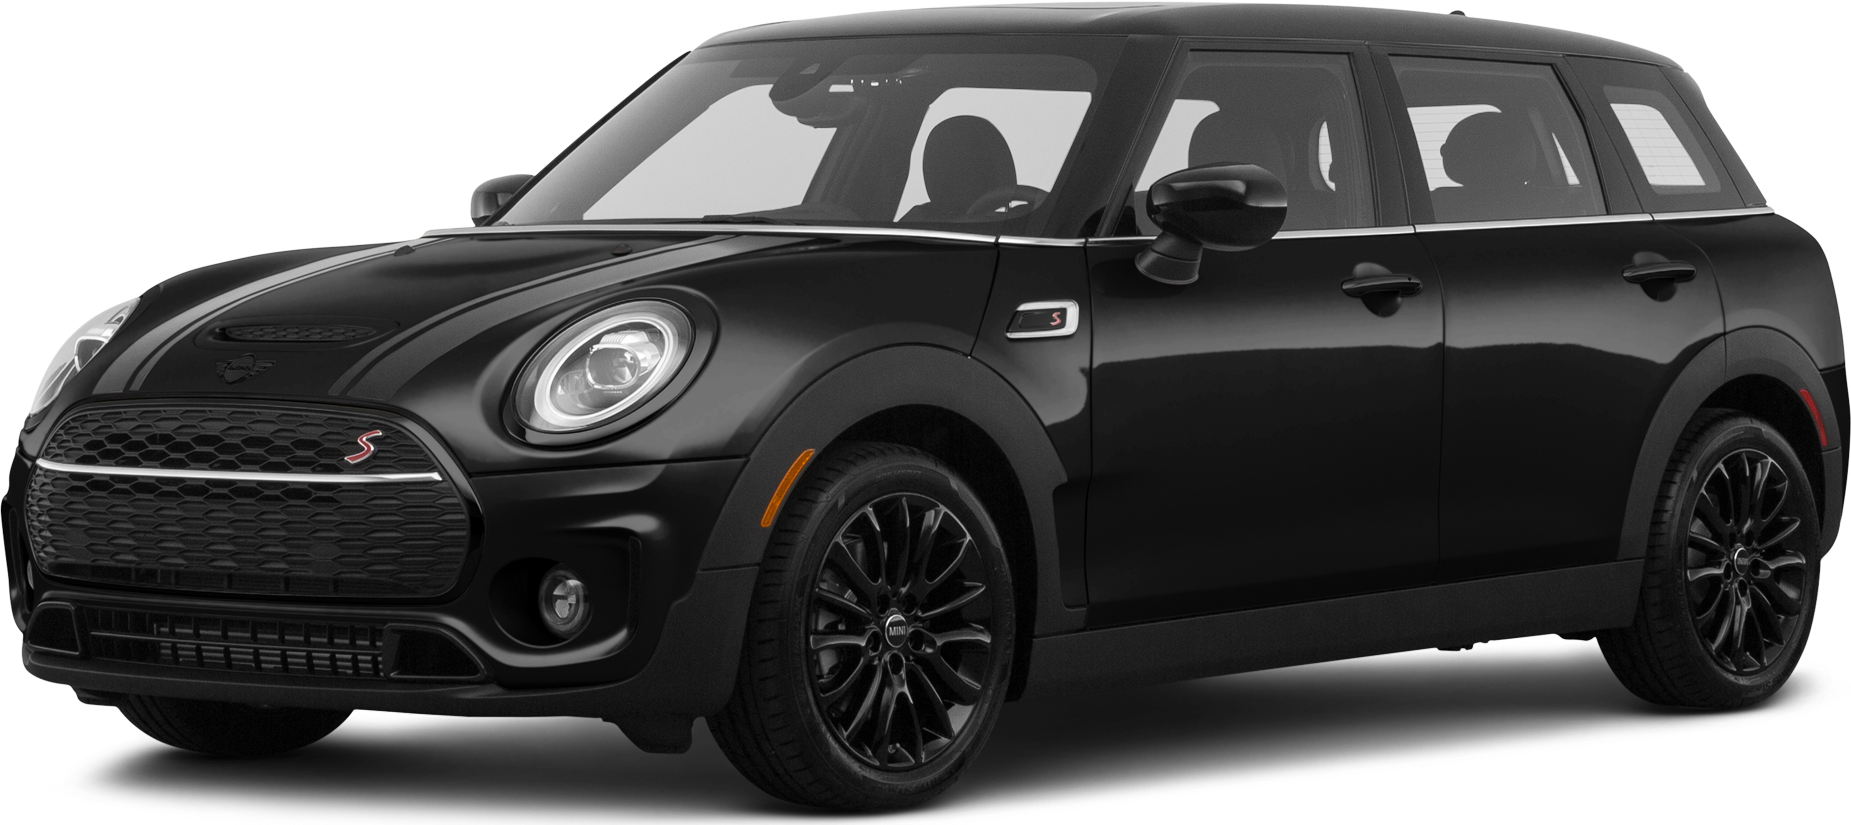 https://file.kelleybluebookimages.com/kbb/base/evox/CP/50800/2023-MINI-Clubman-front_50800_032_1851x825_A94_cropped.png